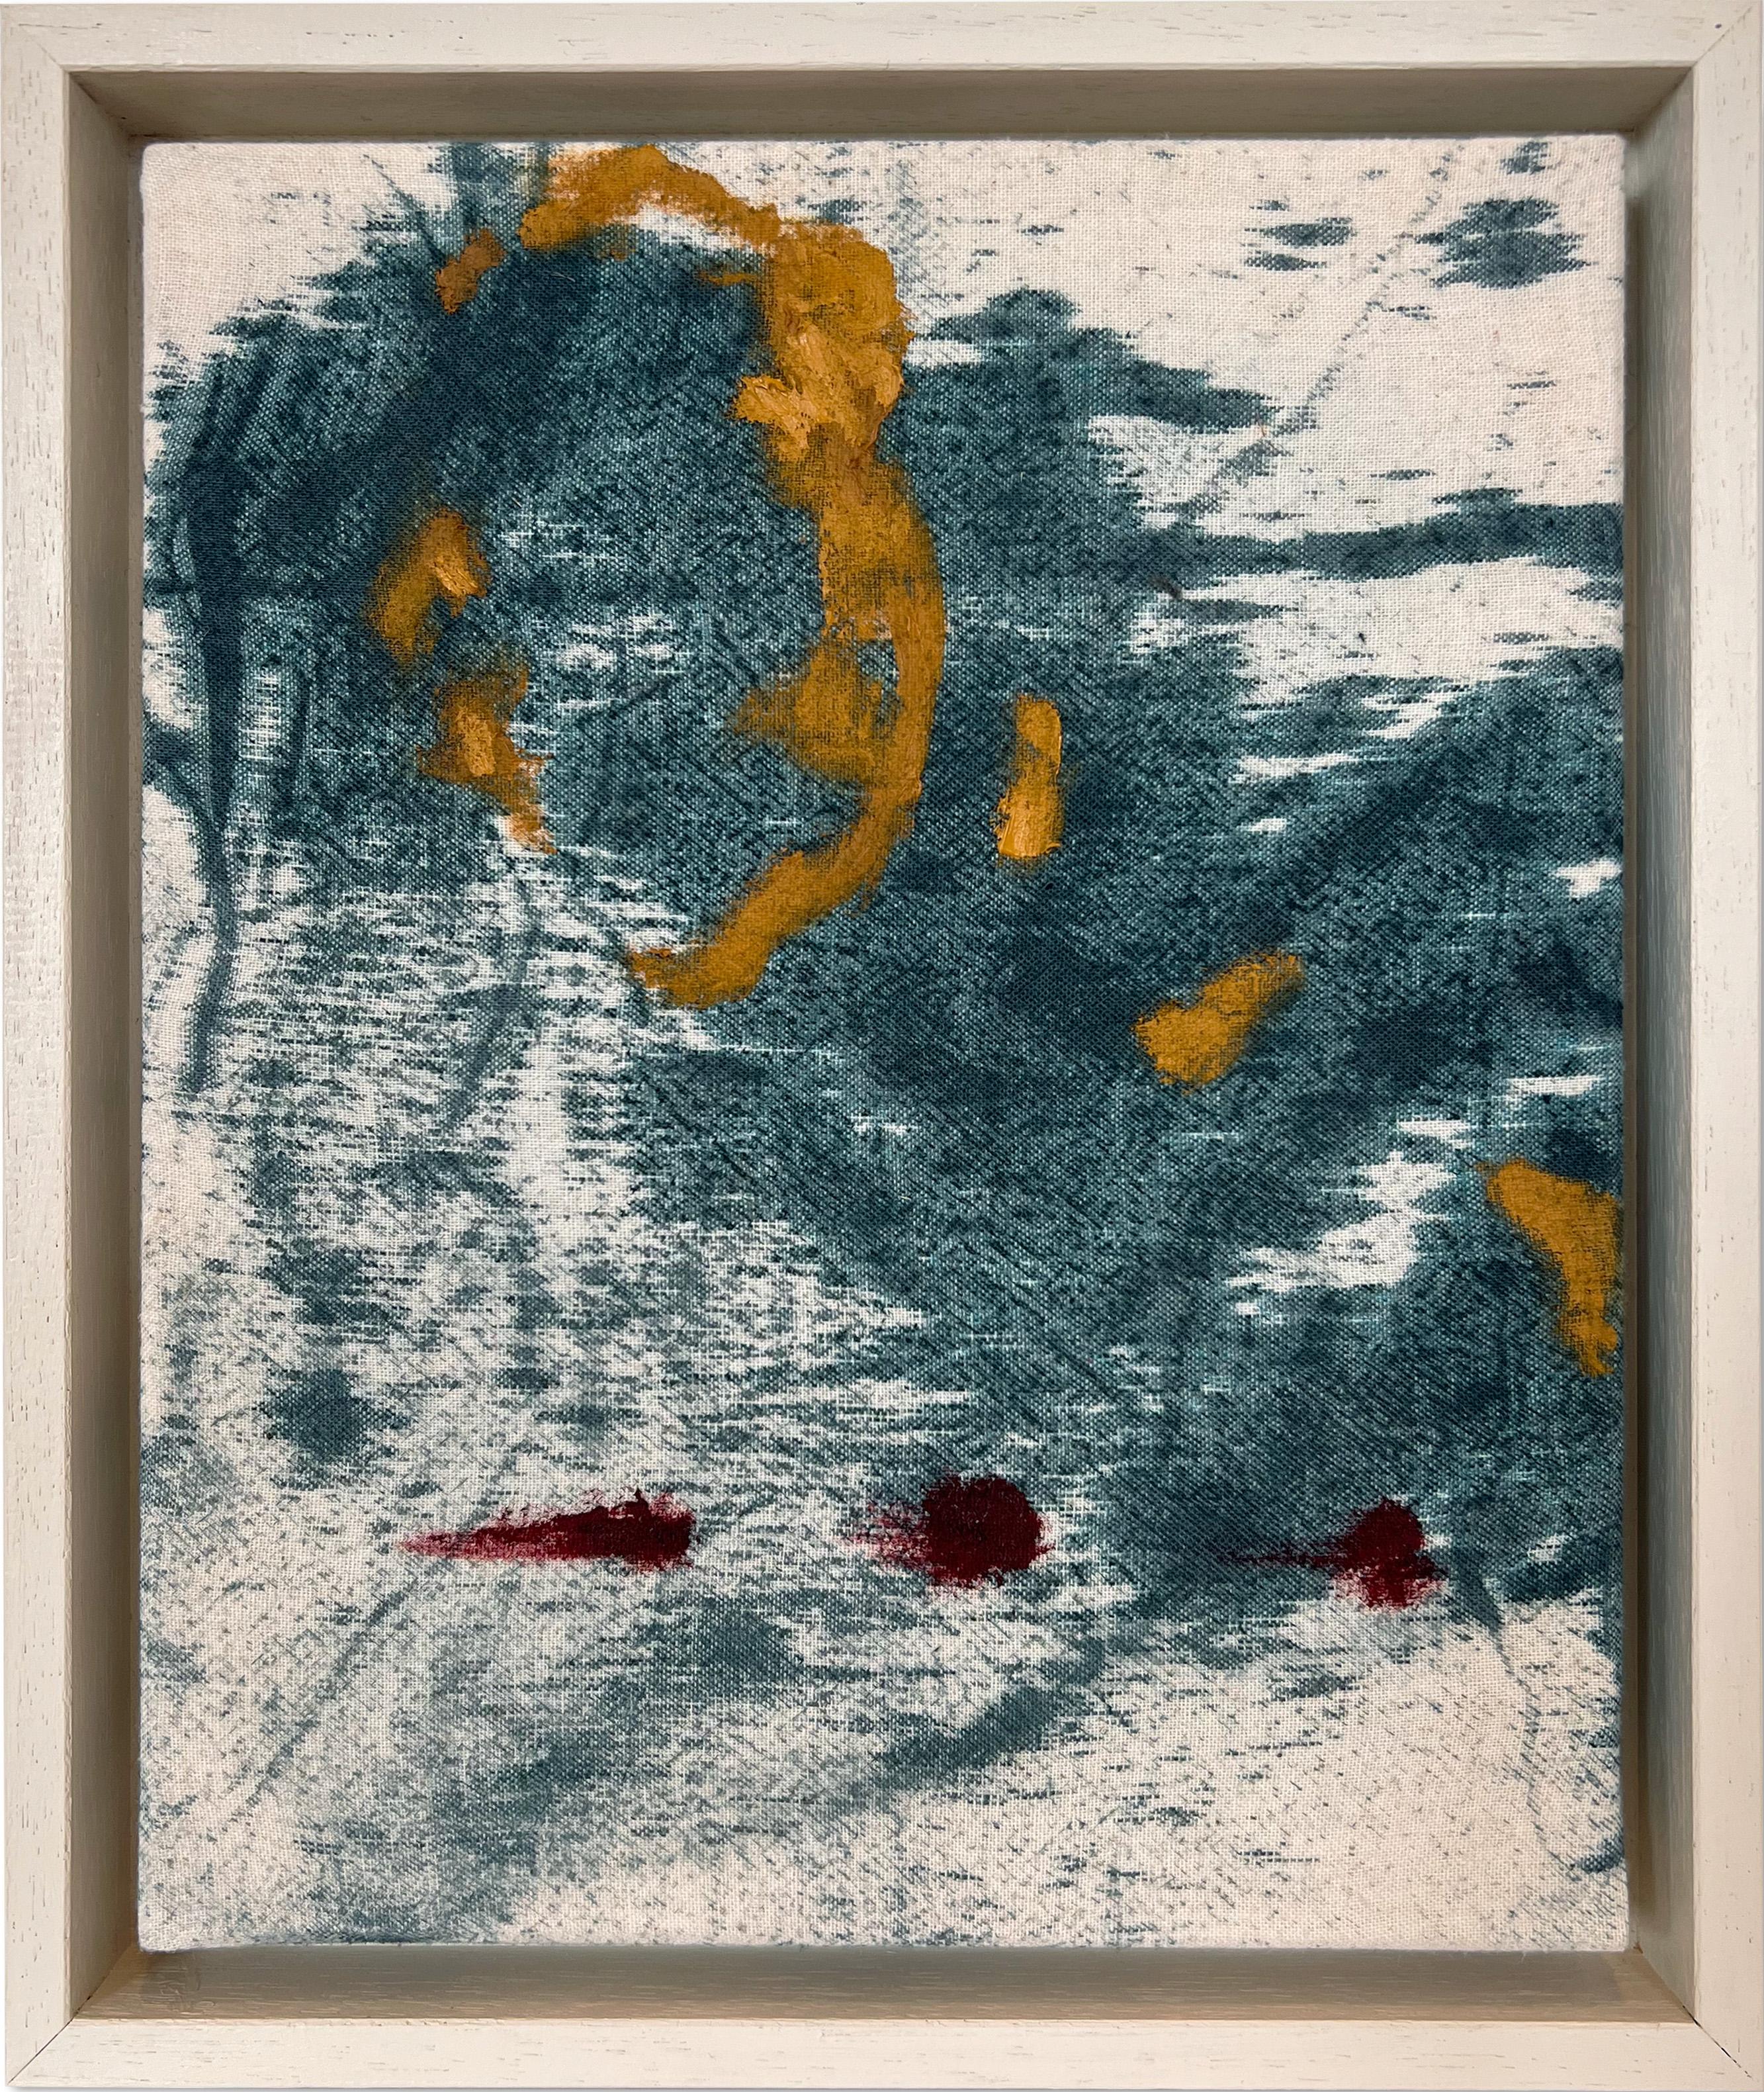 Nicholas Evans Abstract Painting - "Day Remains II" (abstract, blue dye, deep red, yellow, framed painting, cotton)